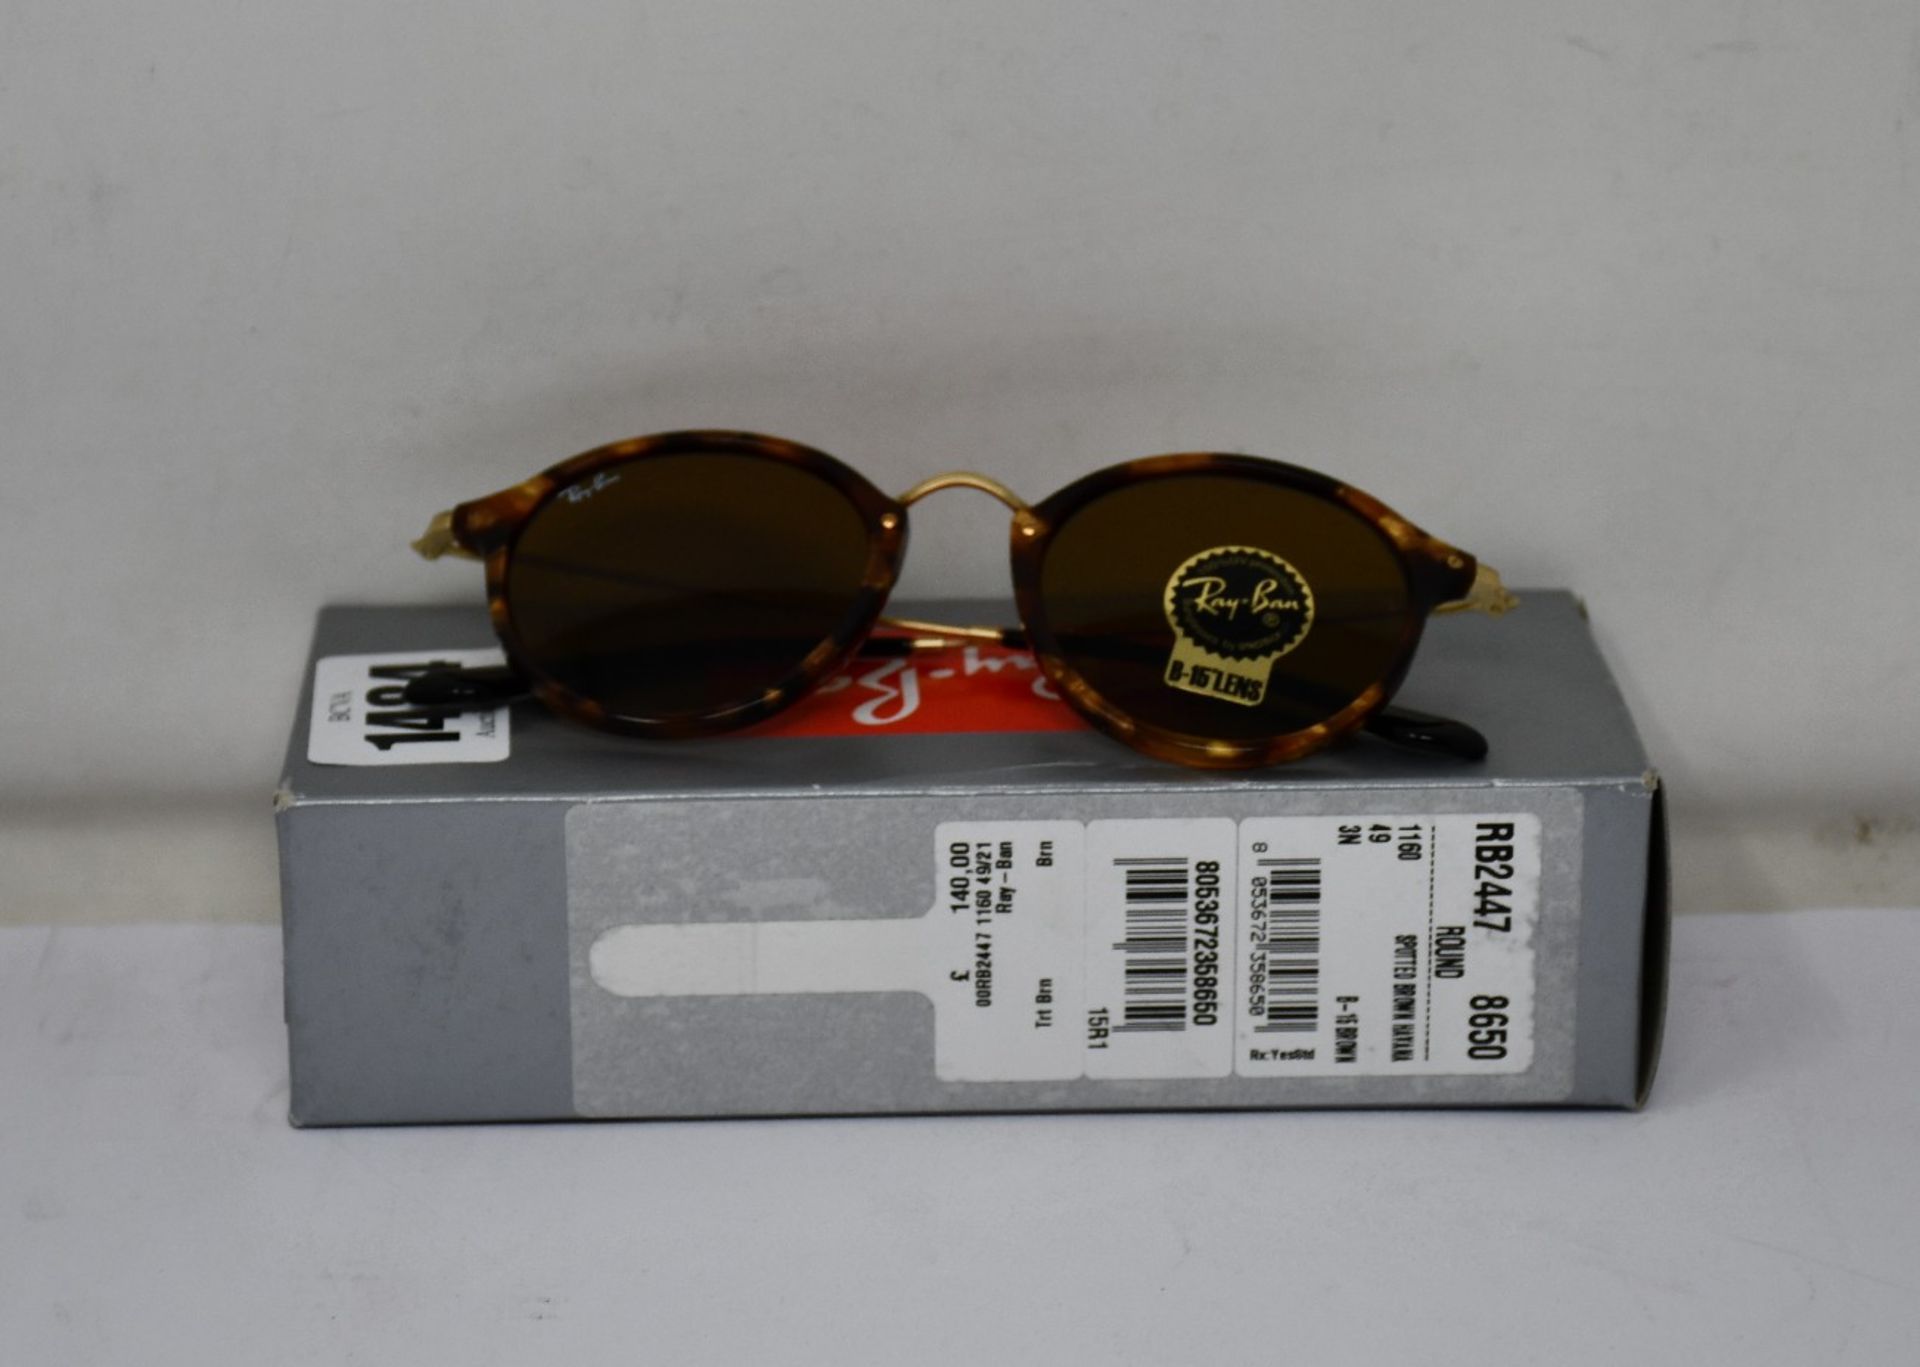 A pair of as new Ray Ban Round sunglasses.